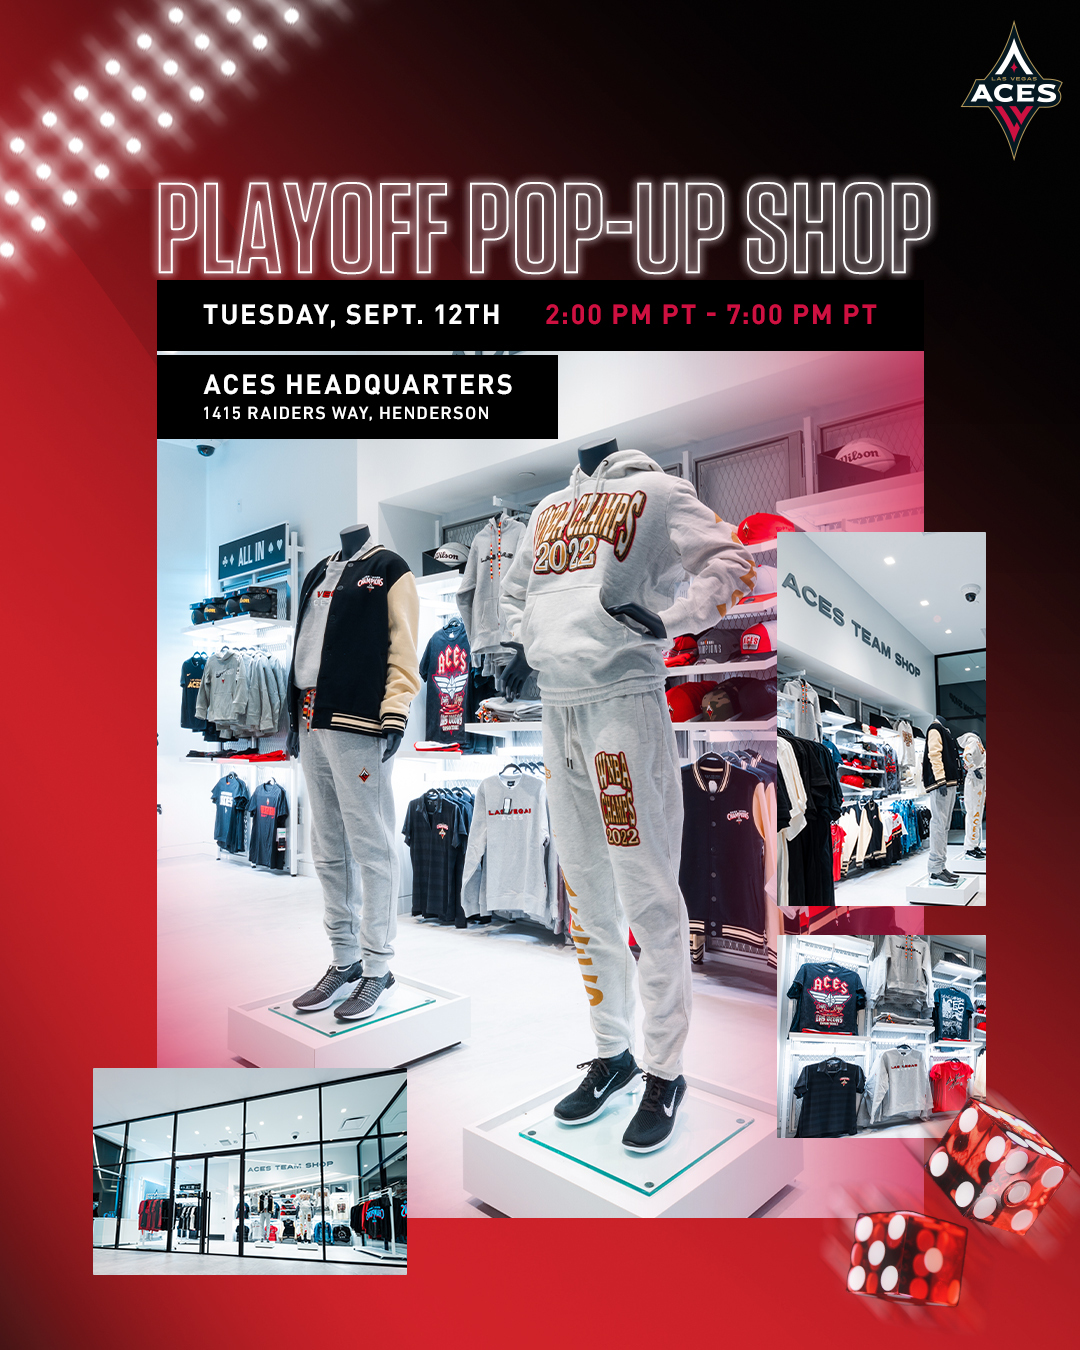 Aces Team Shop hosting pop-up with playoff gear on Tuesday